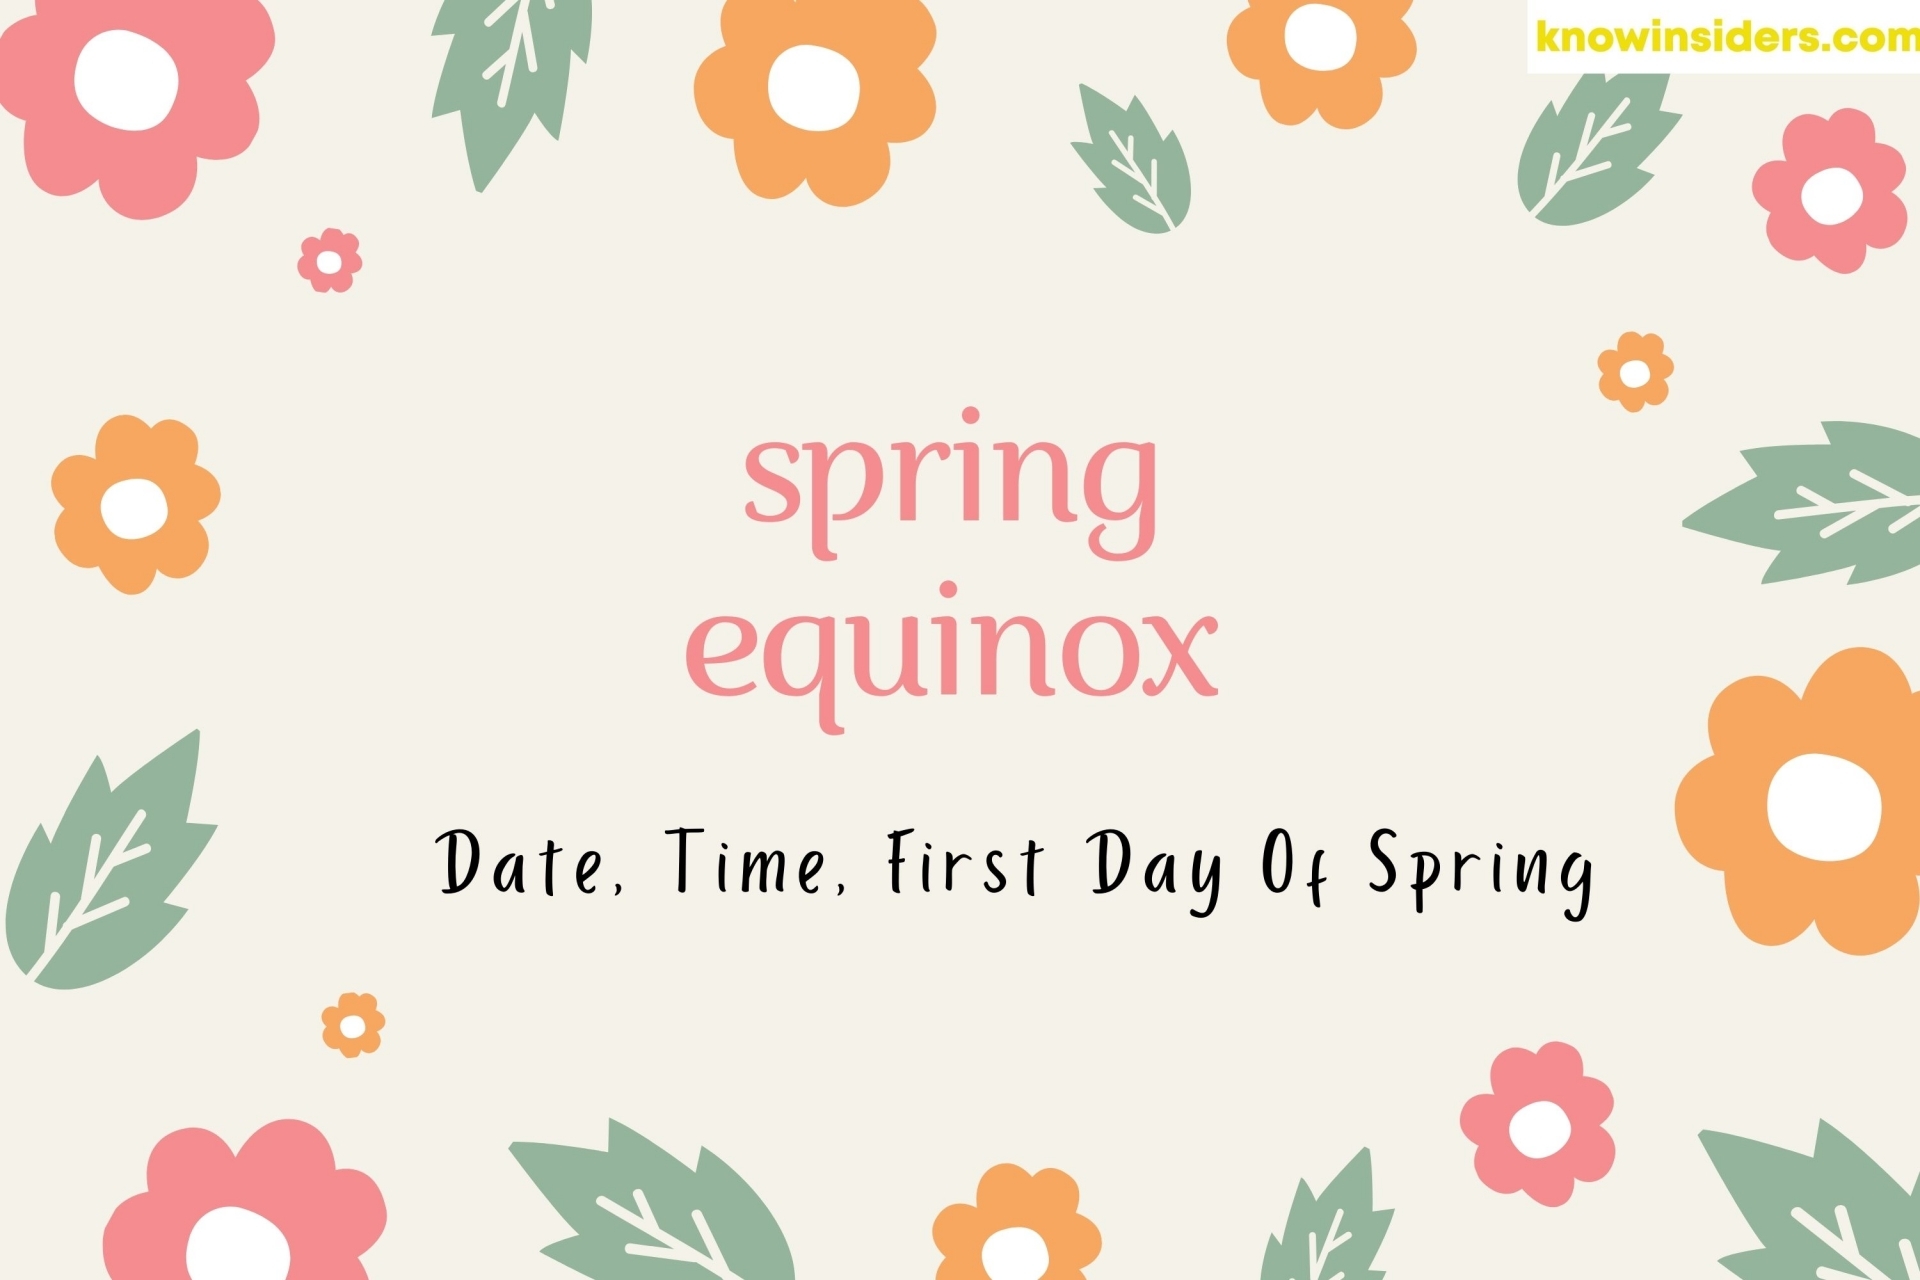 What Will Happen On Spring Equinox: Date, Time, First Day Of Spring